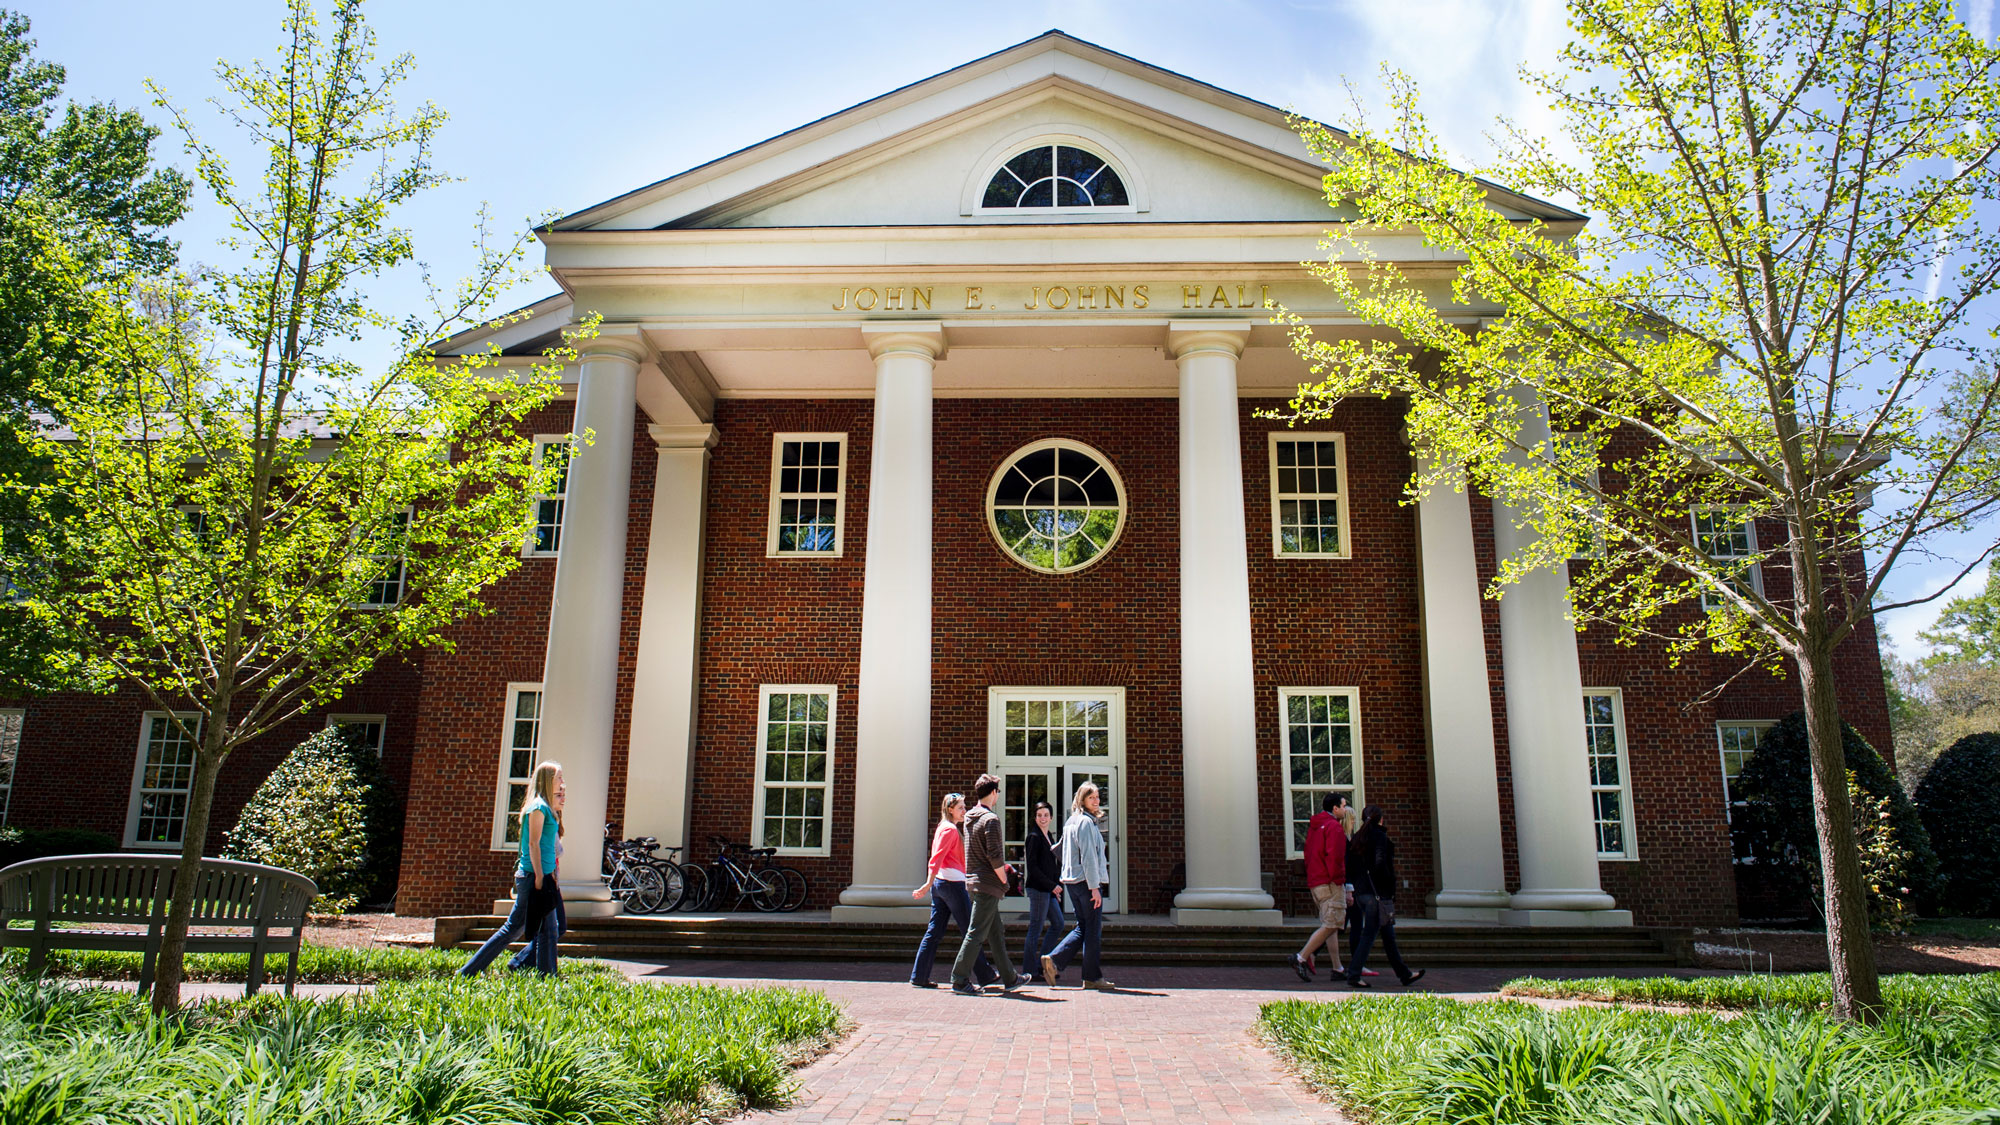 Johns Hall with students walking in front of the building